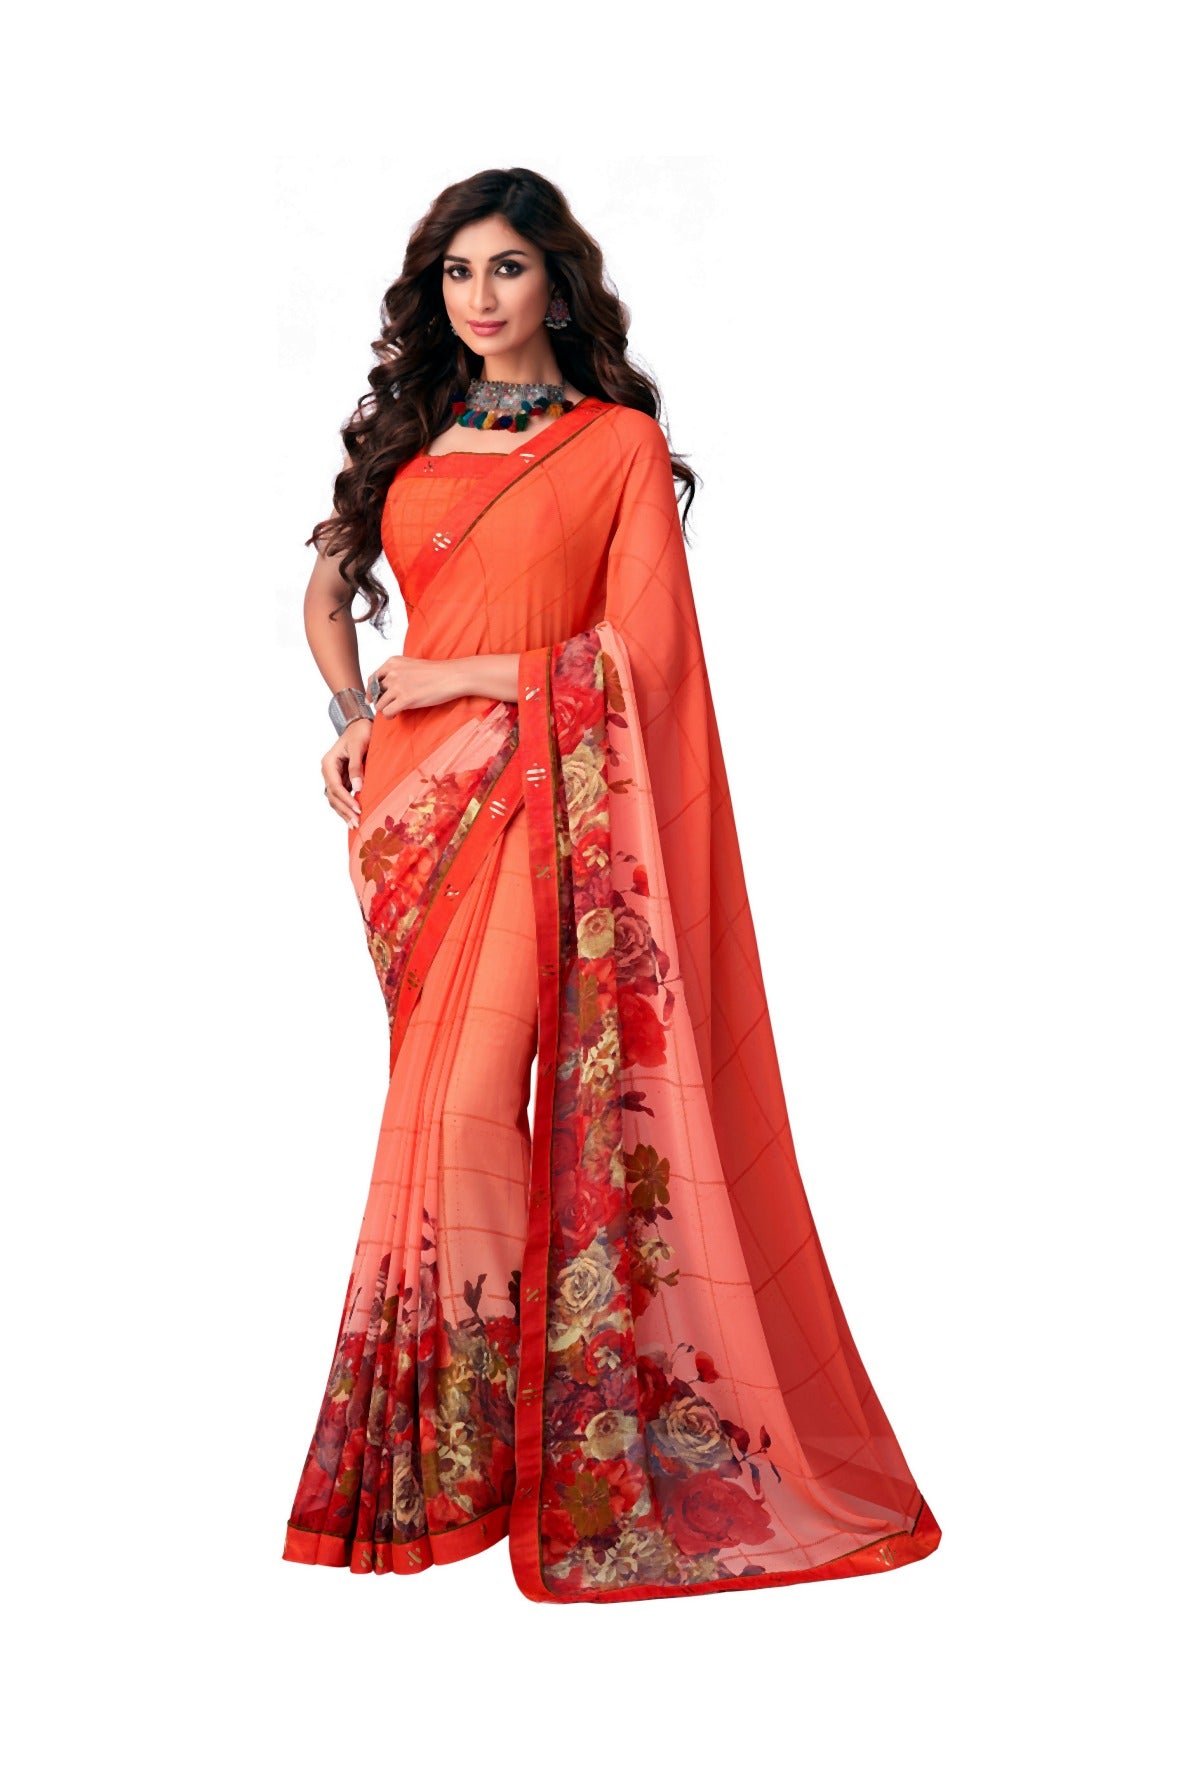 Women's And Girl's Readymade Japanese Crepe Saree With Stitched